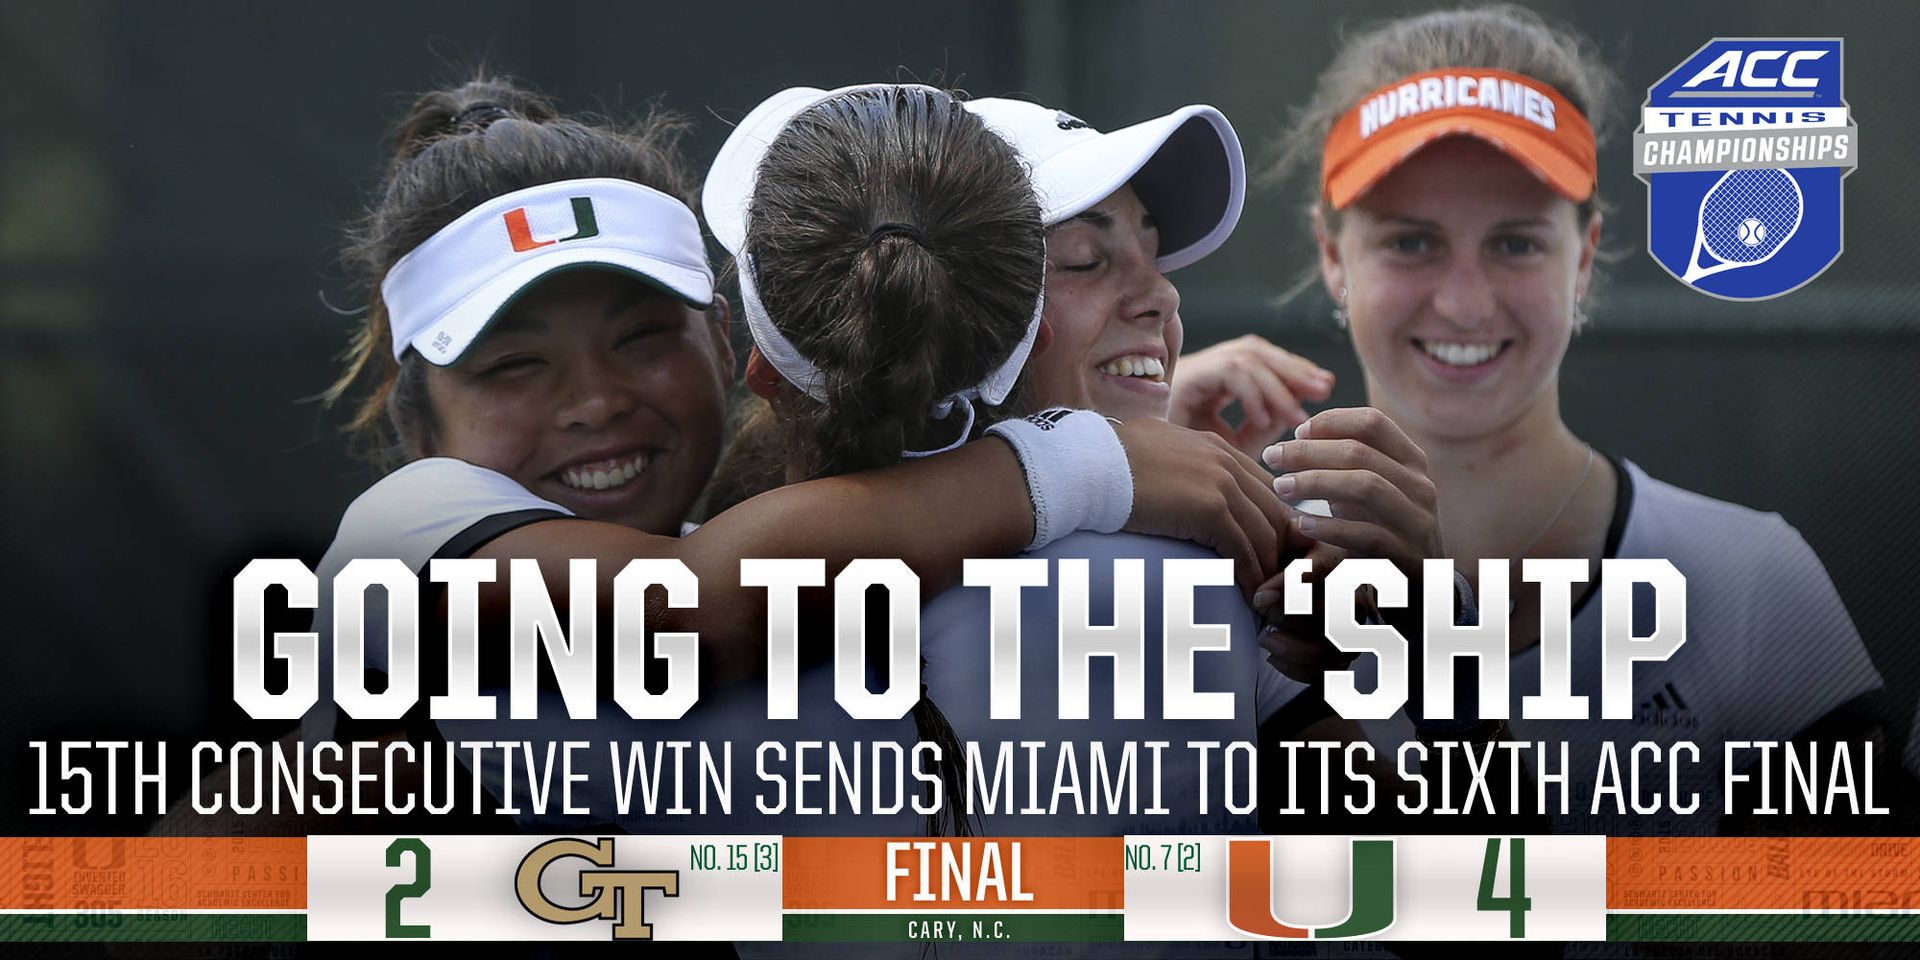 Canes Down No. 15 GT, Advance to ACC Title Match